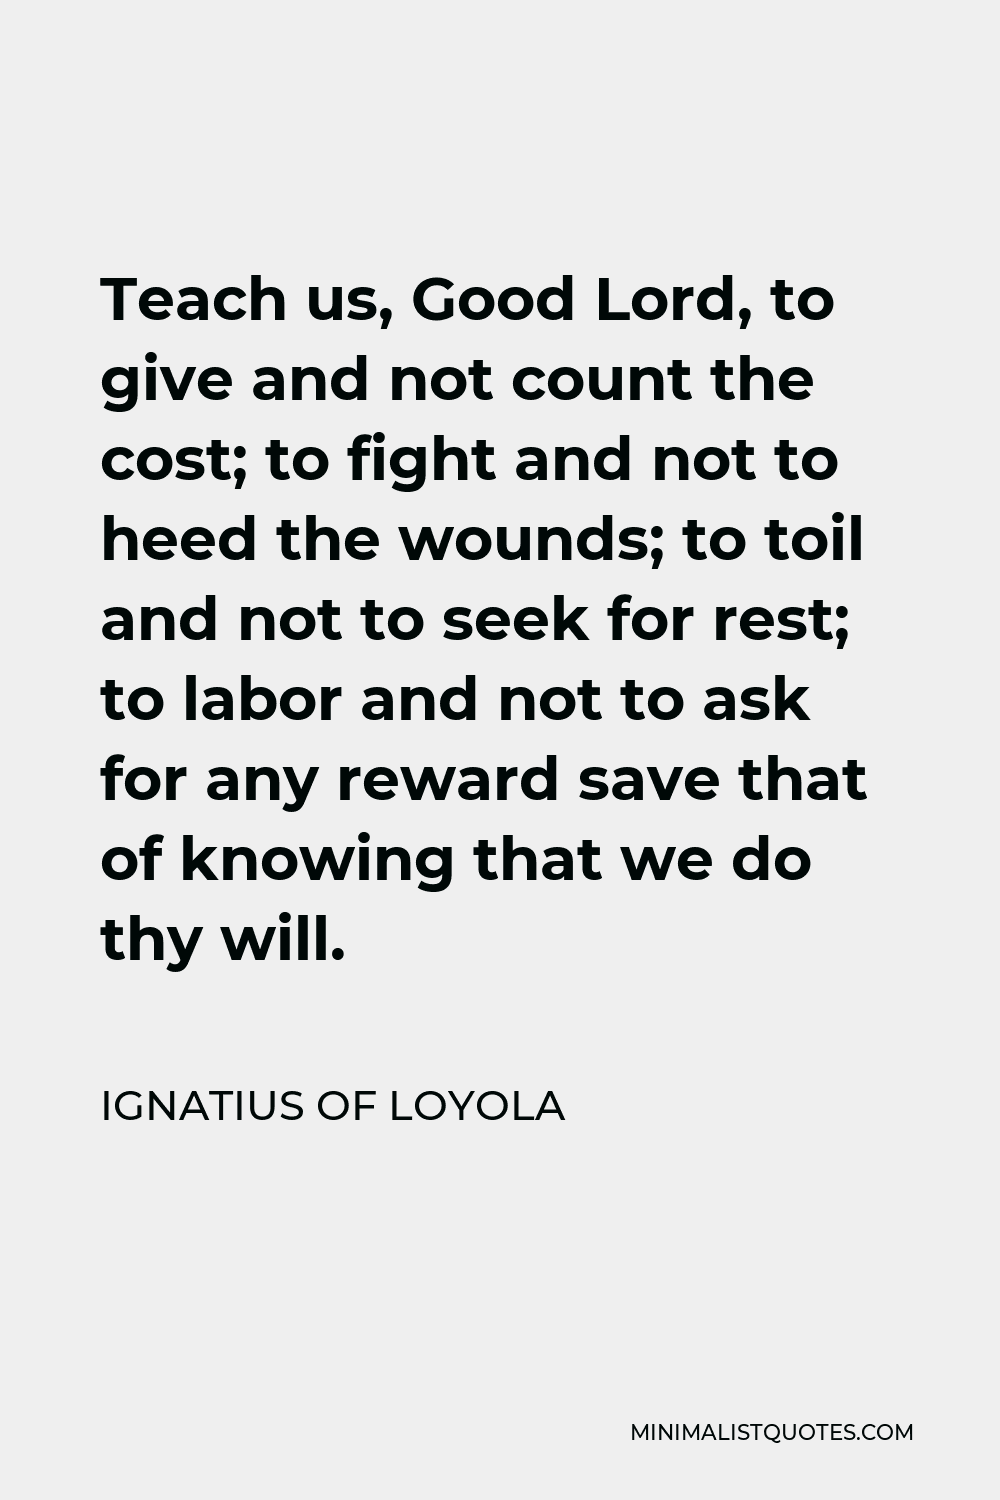 Ignatius of Loyola Quote - Teach us, Good Lord, to give and not count the cost; to fight and not to heed the wounds; to toil and not to seek for rest; to labor and not to ask for any reward save that of knowing that we do thy will.